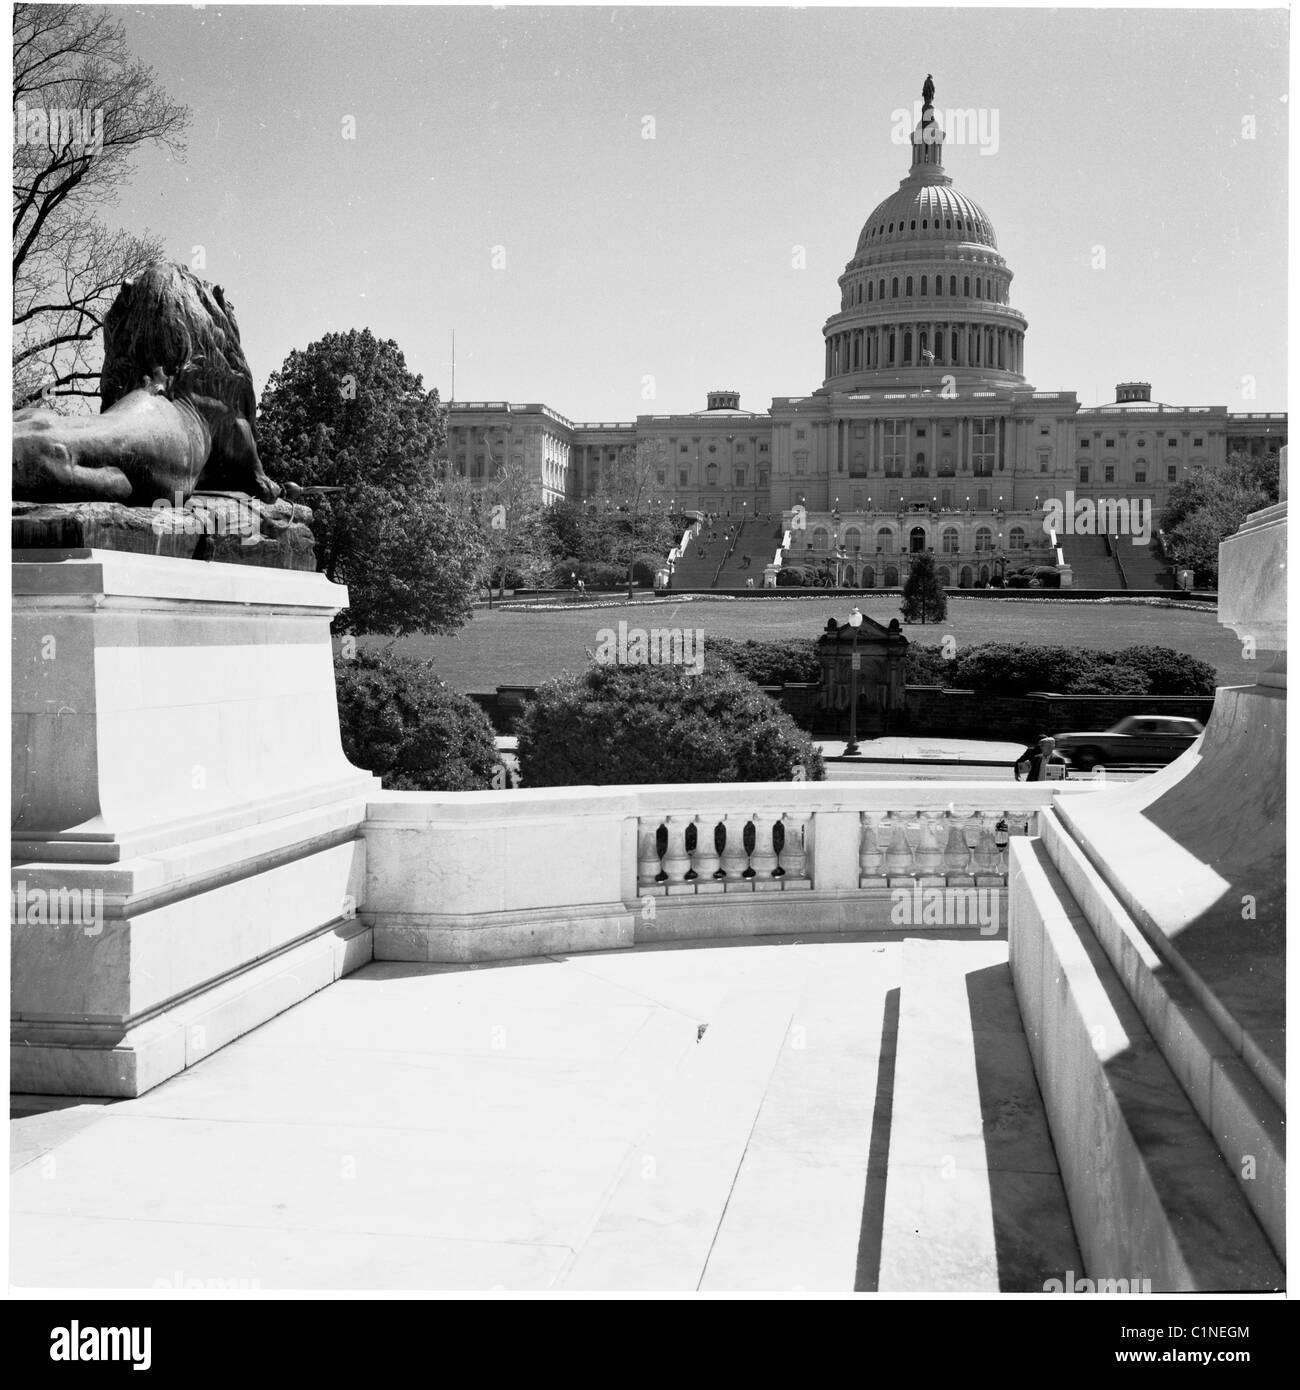 1960s, historical, view of the US Capitol Building, Washington DC, home to the US Congress, the legislative branch of the American government. Stock Photo